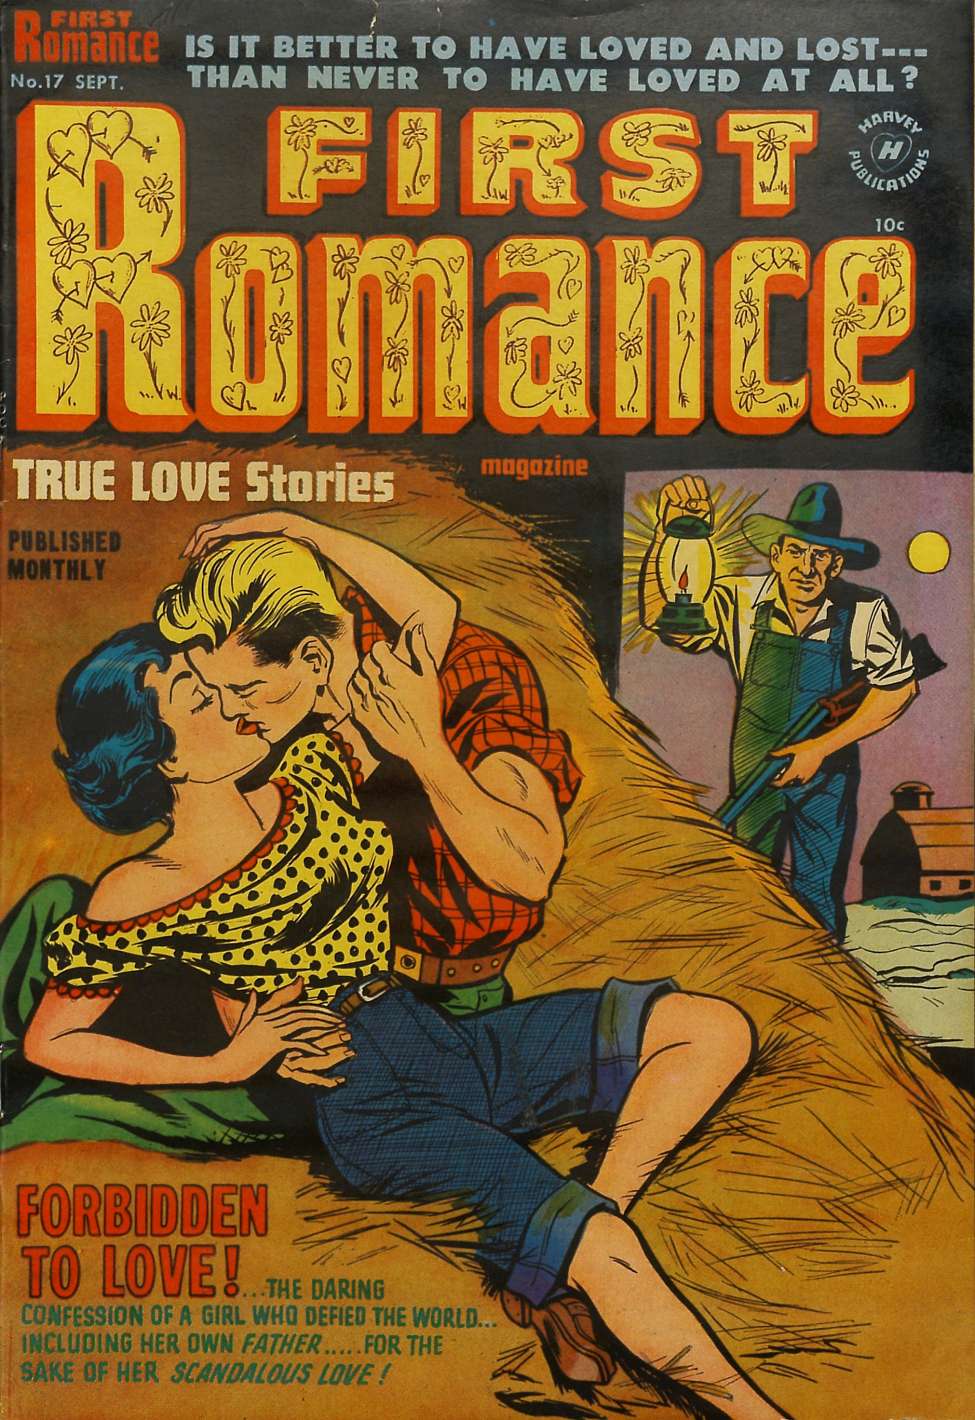 Book Cover For First Romance Magazine 17 - Version 1